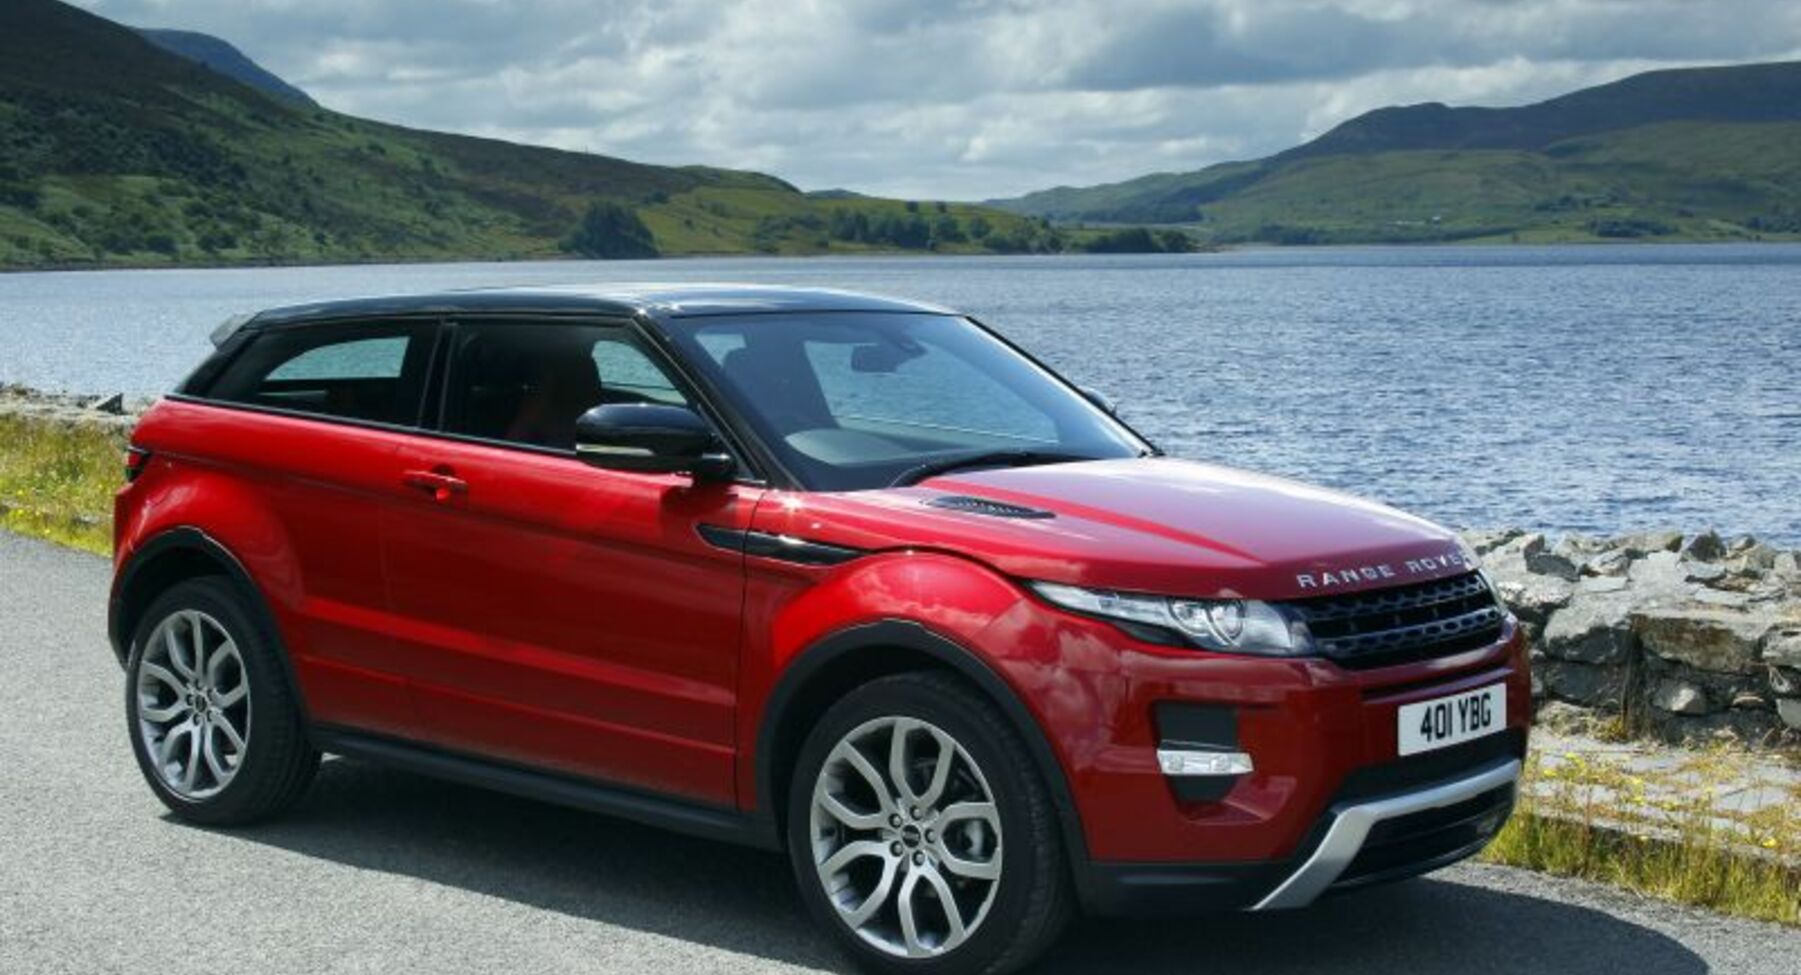 Land Rover Range Rover Evoque I coupe 2.0 Si4 (240 Hp) AWD Automatic 2015 